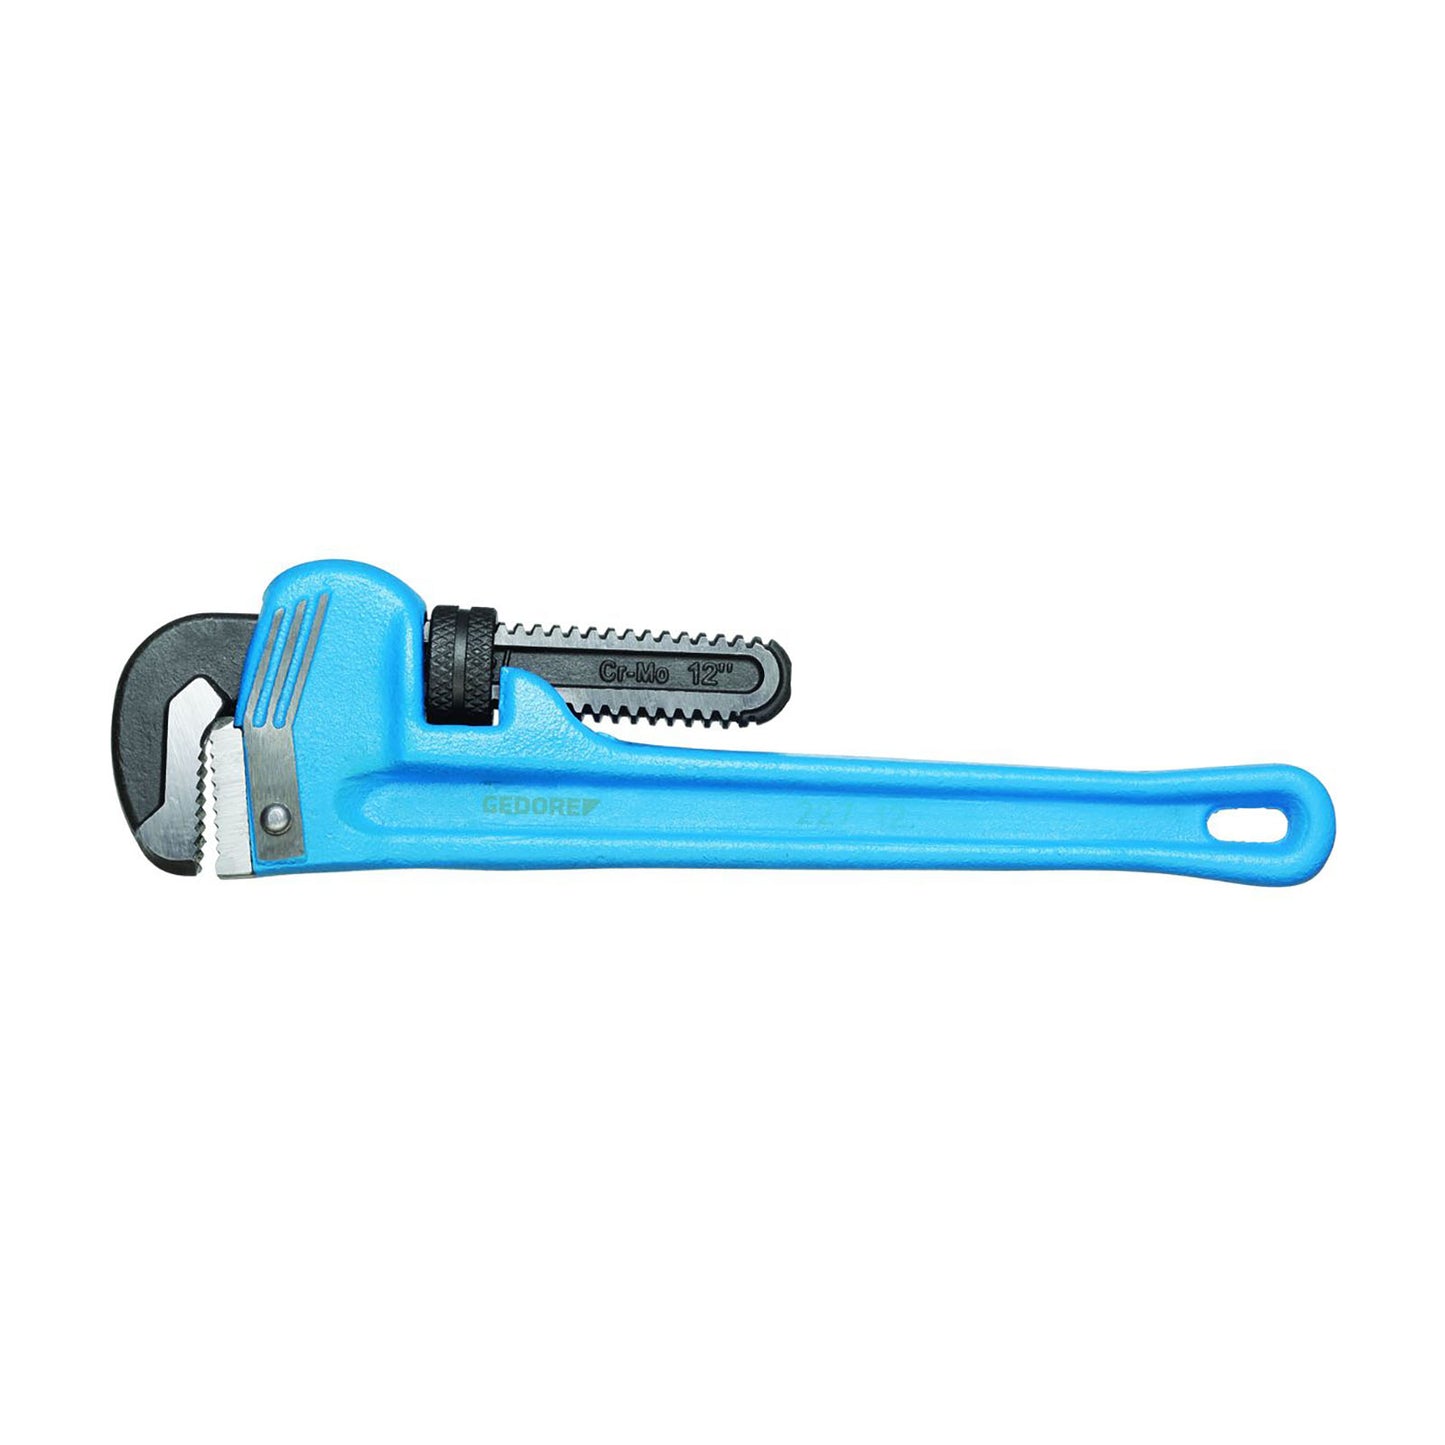 GEDORE 227 24 - Rf 227 Pipe Wrench 24 (6453620)